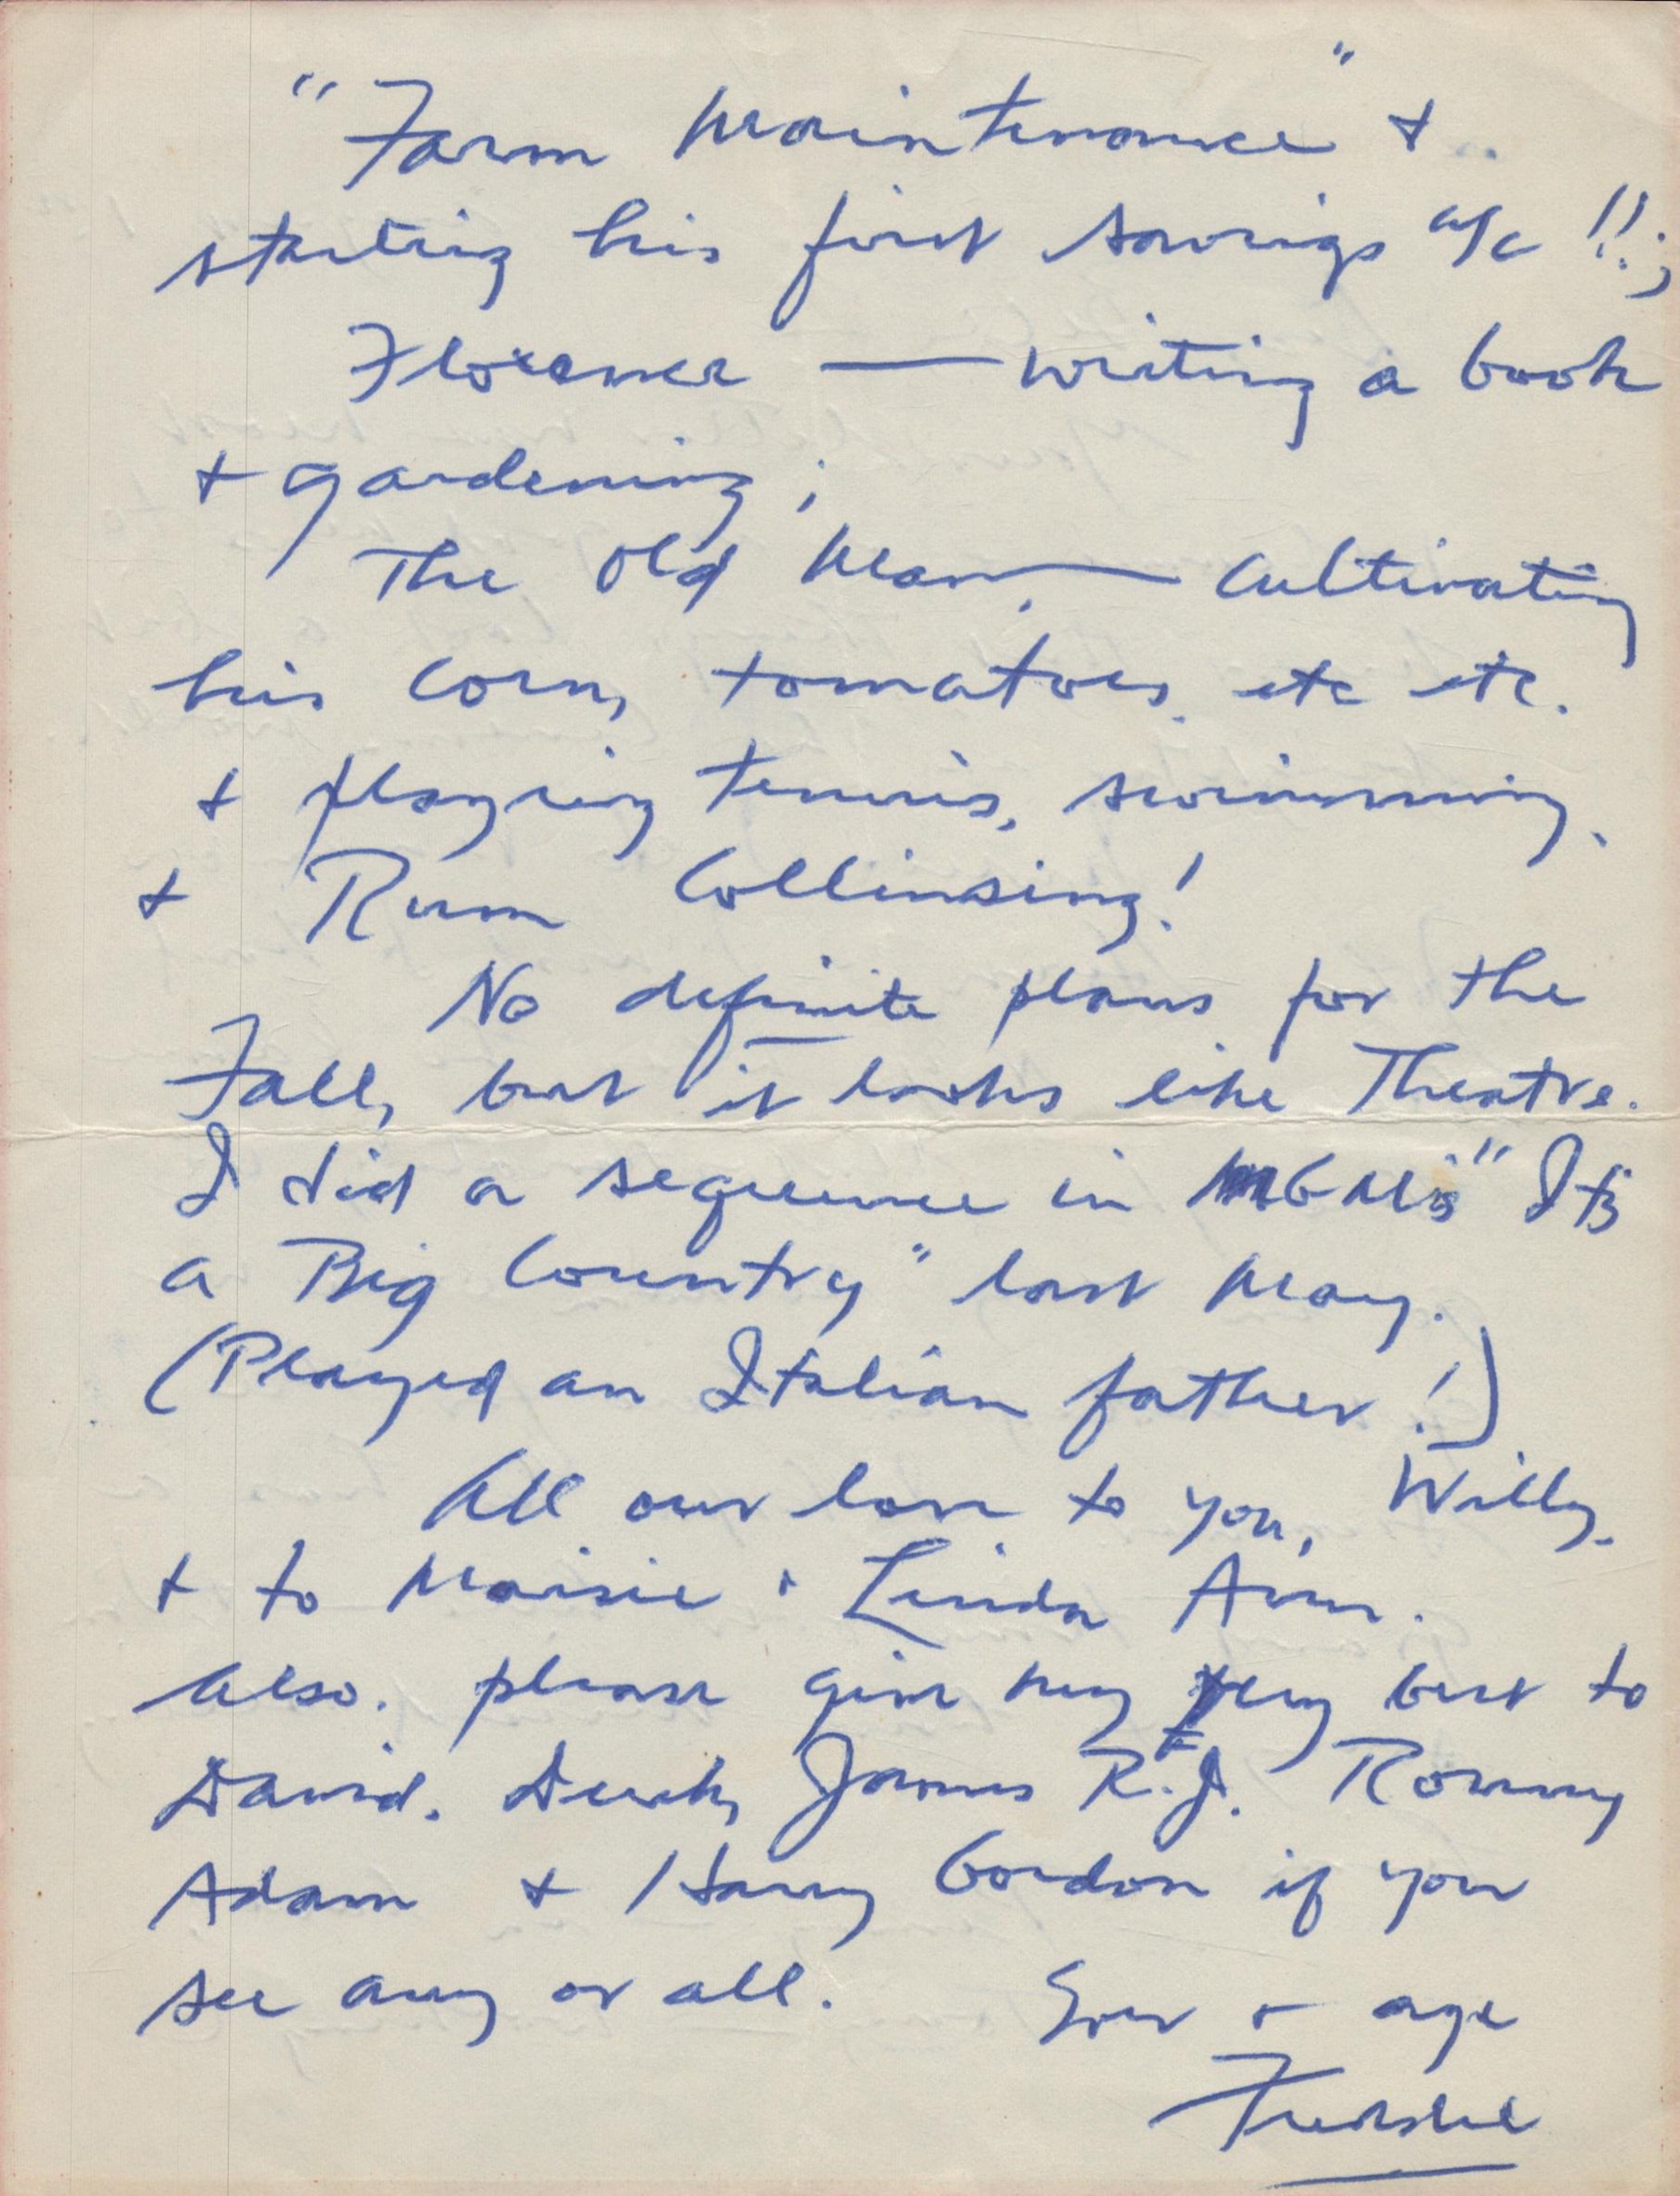 Frederic March - vintage ALS on his headed notepaper dated August 1st (n/y) mostly giving updates on